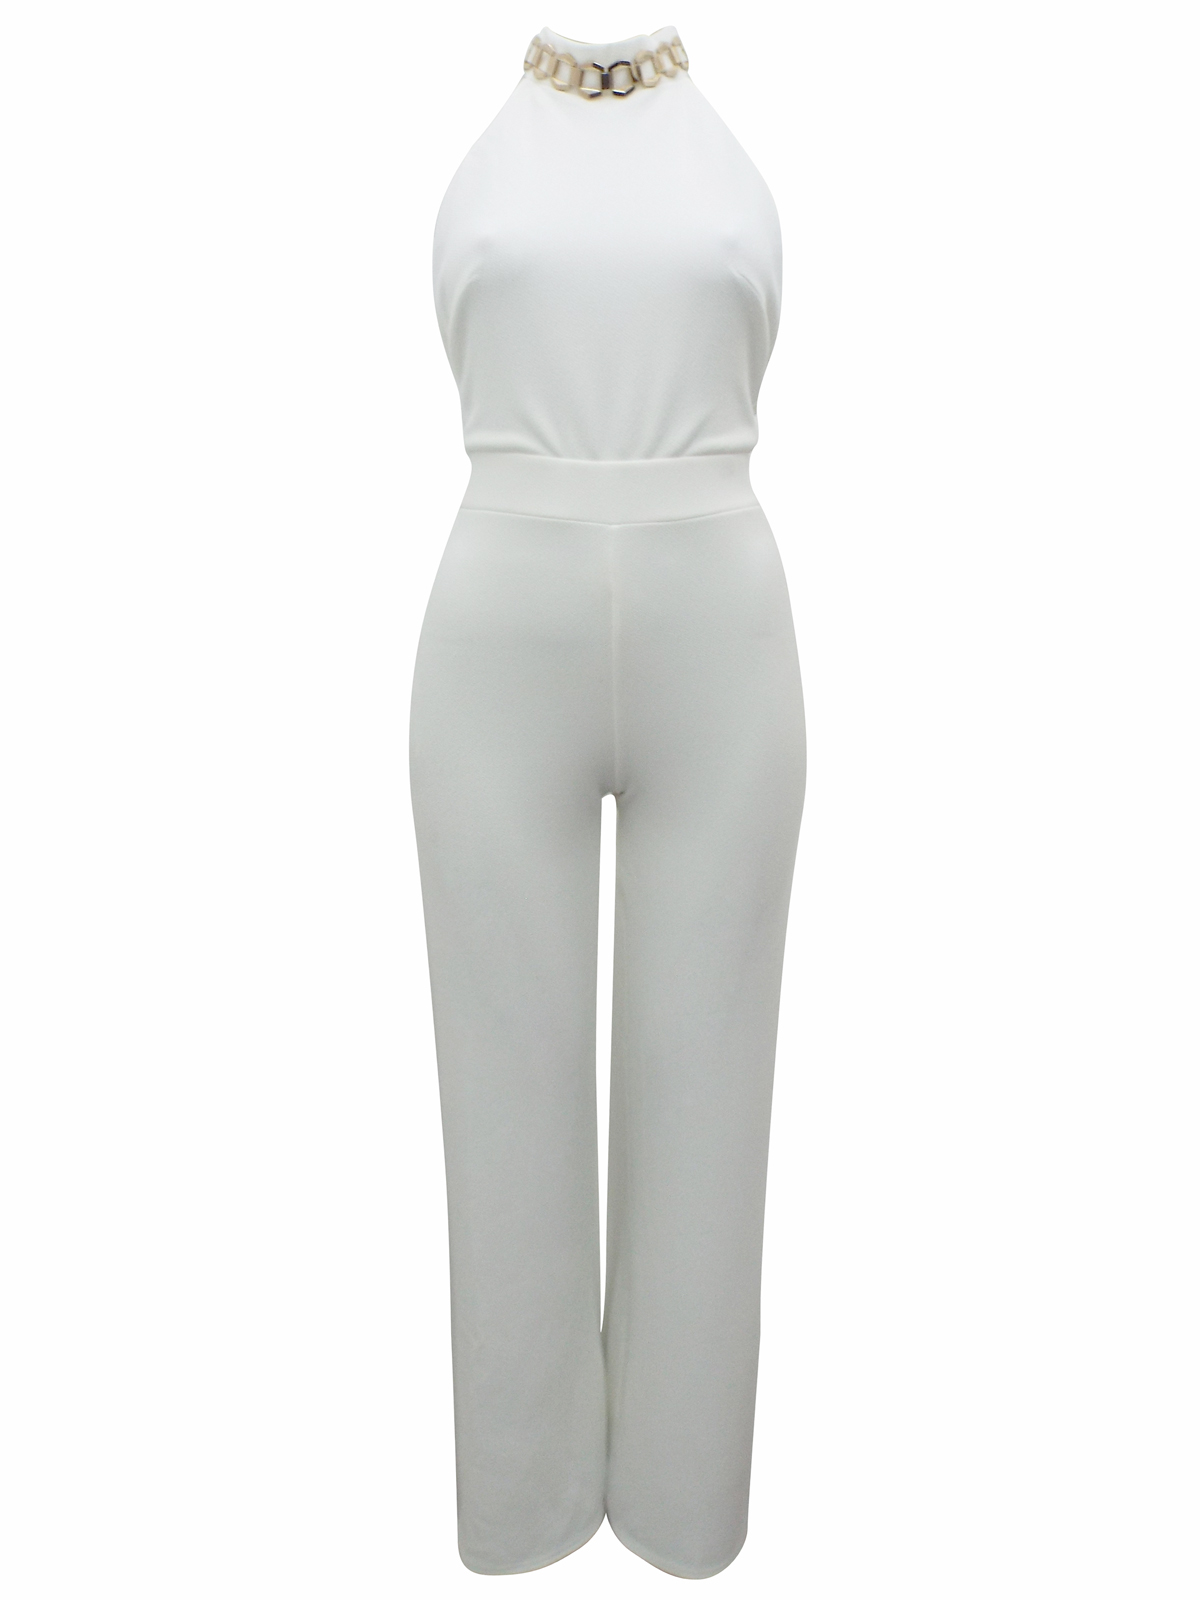 Miss Selfridge - - IVORY High Neck Chain Open Back Jumpsuit - Size 6 to 10